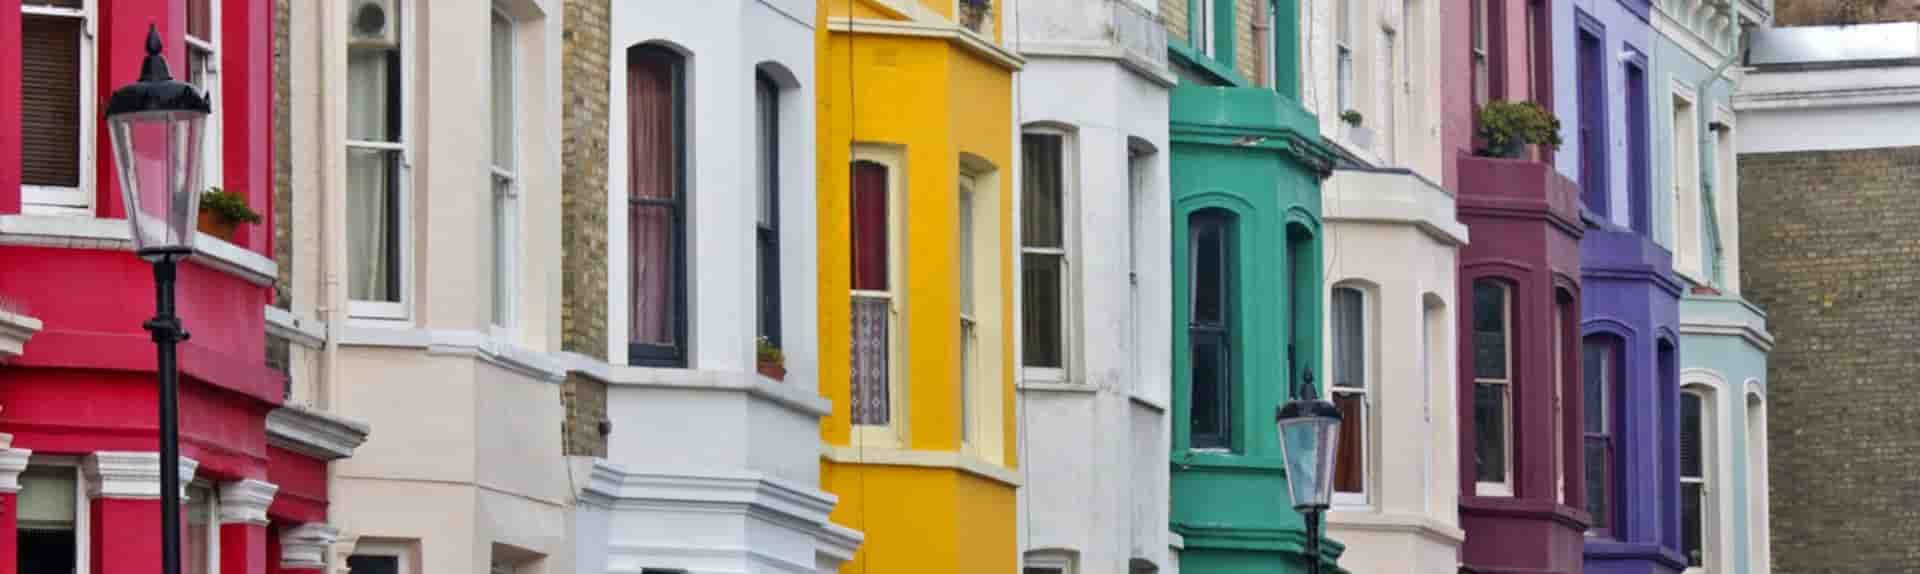 colourful terraced houses